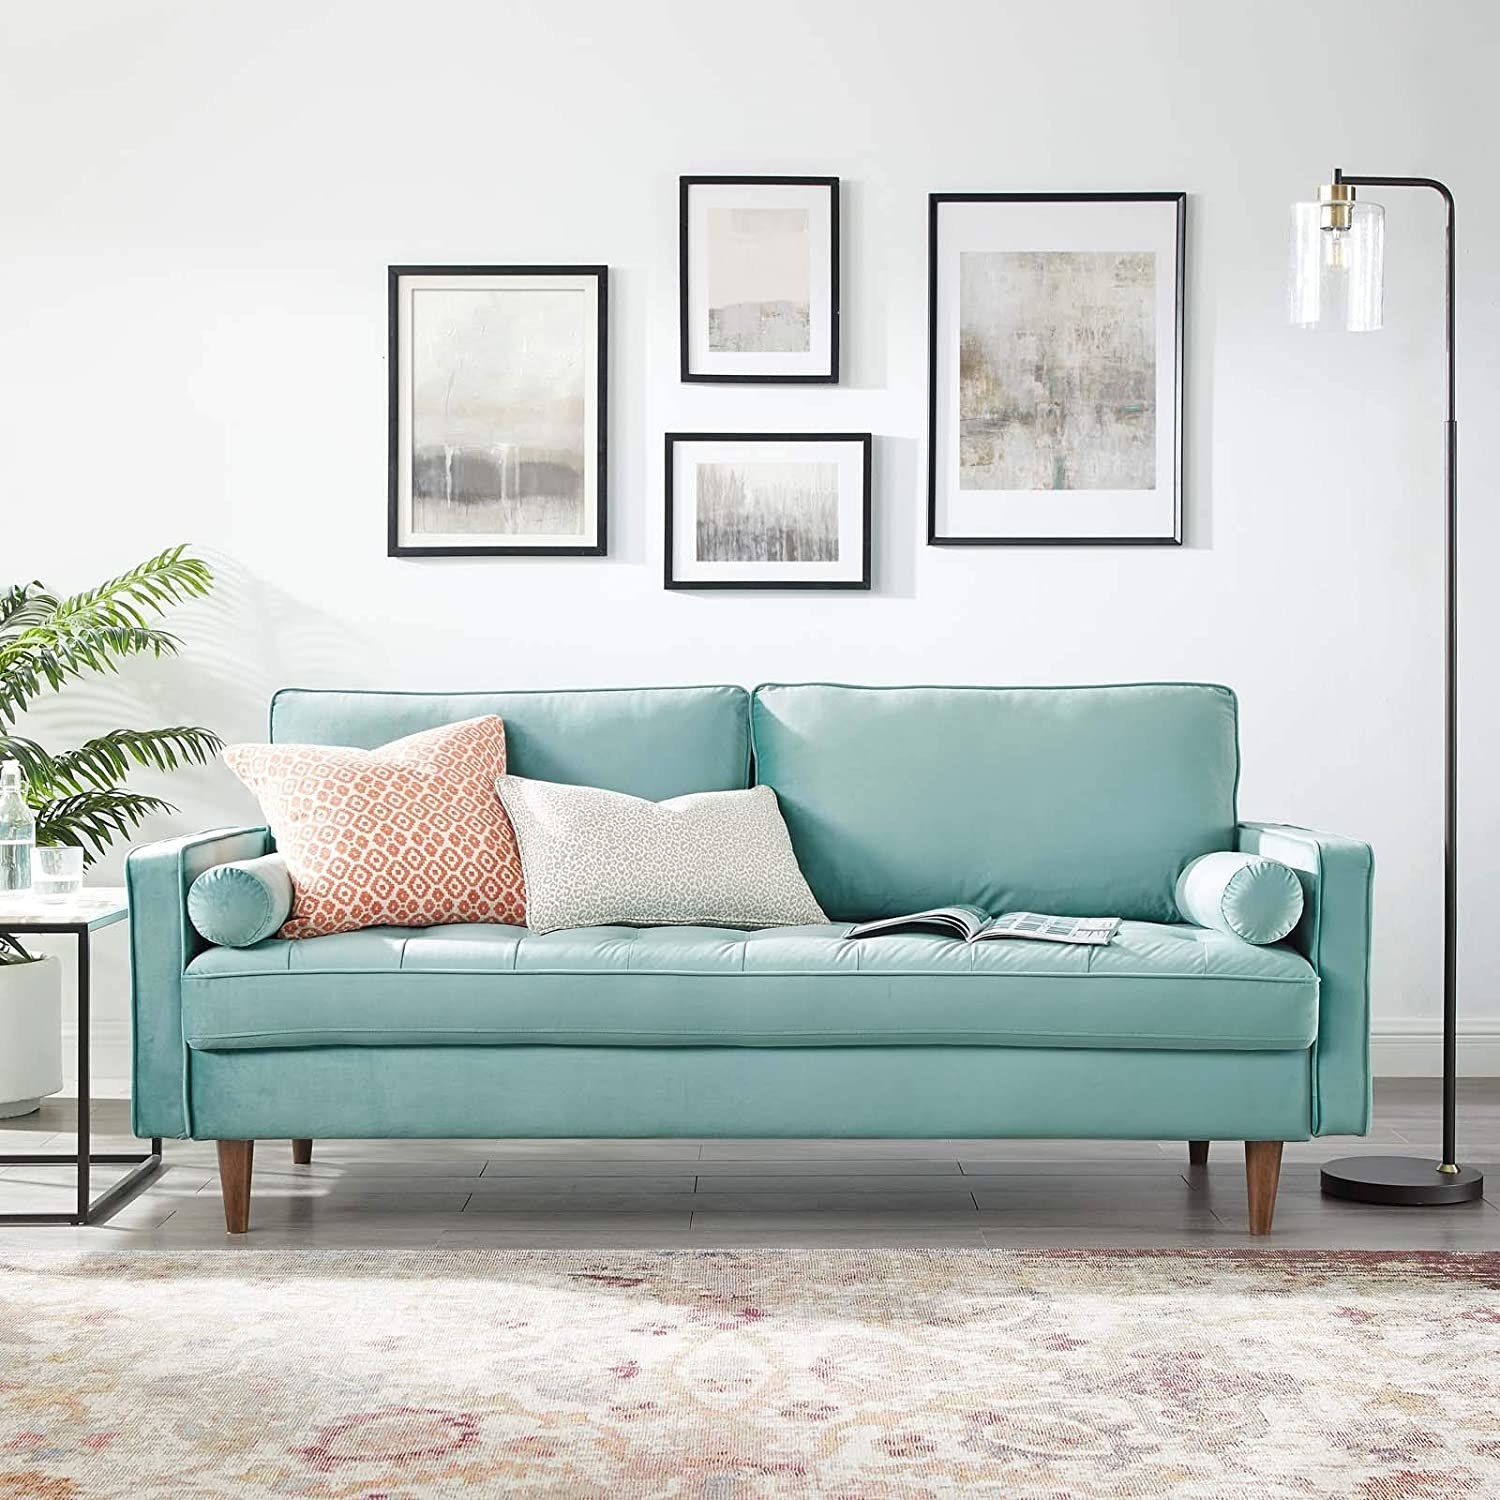 A light blue couch in a white room